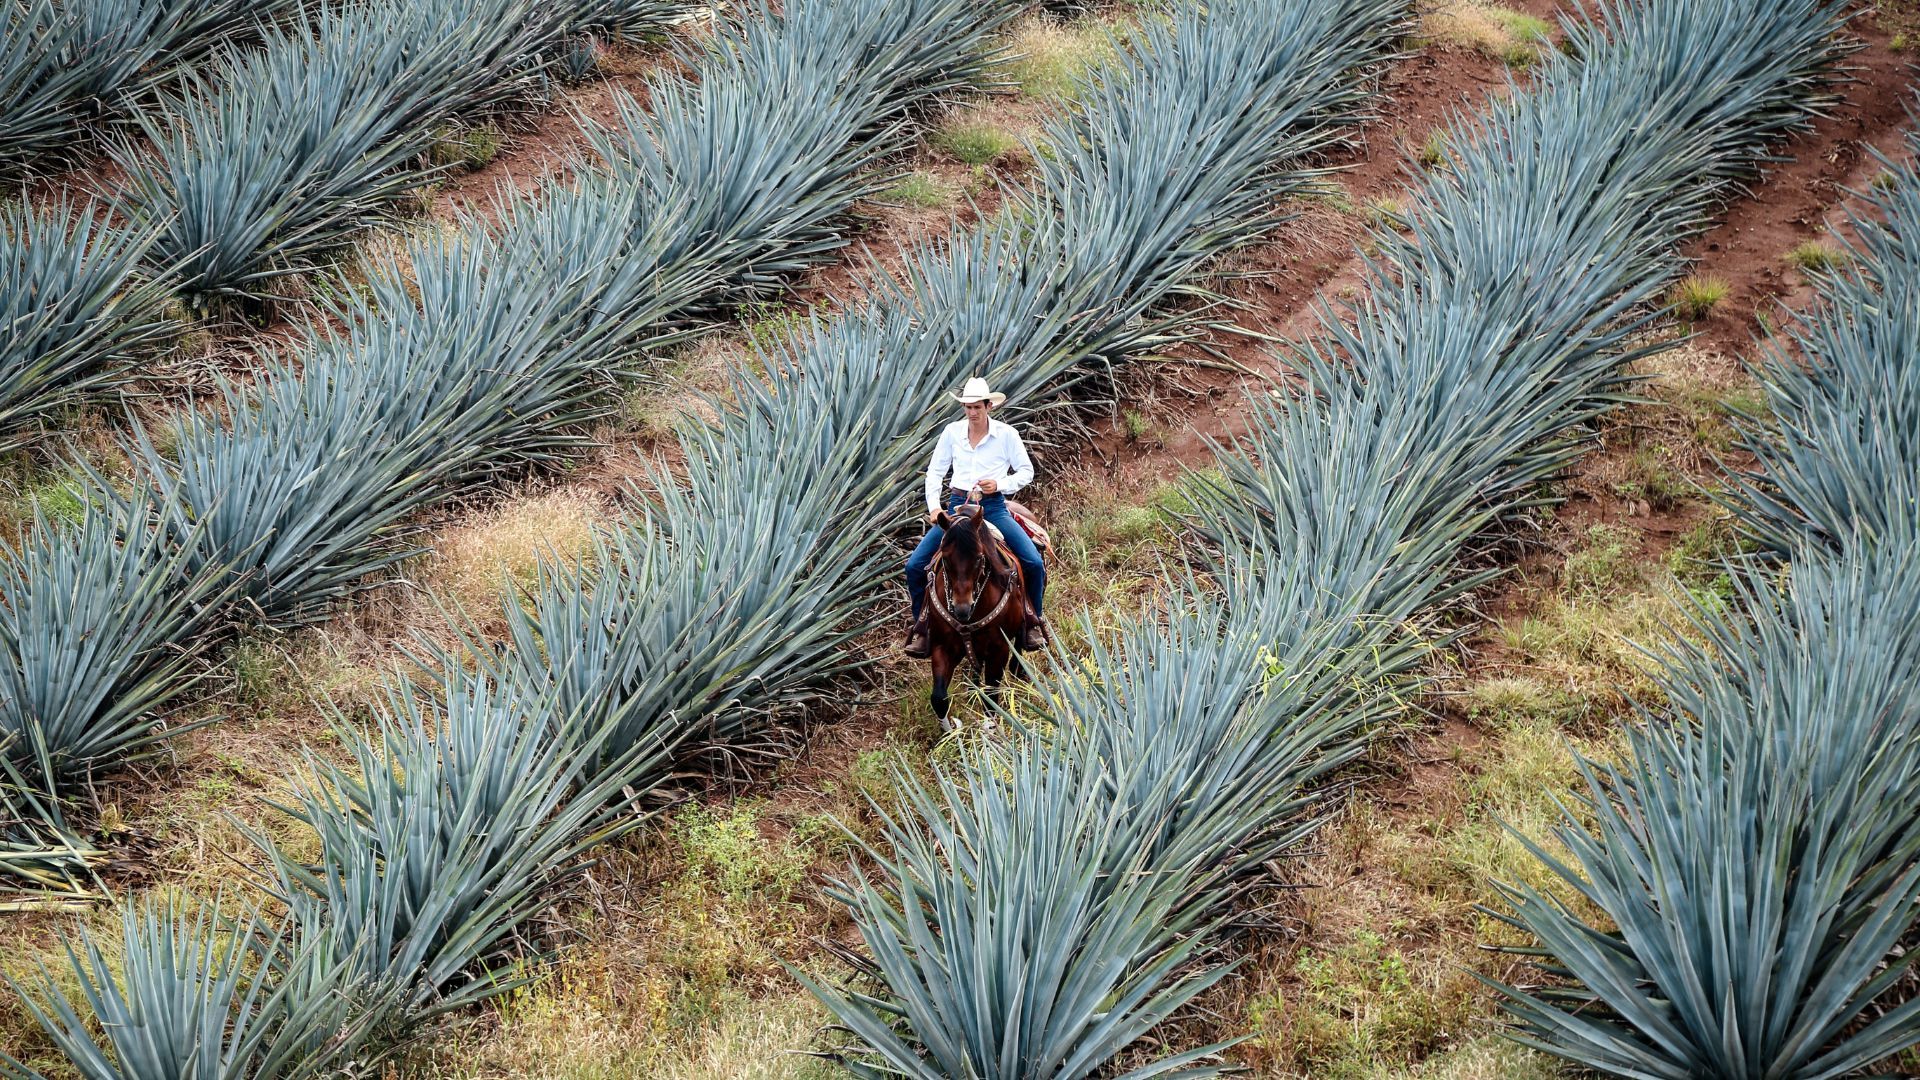 Tequila and Mezcal: Agave plant